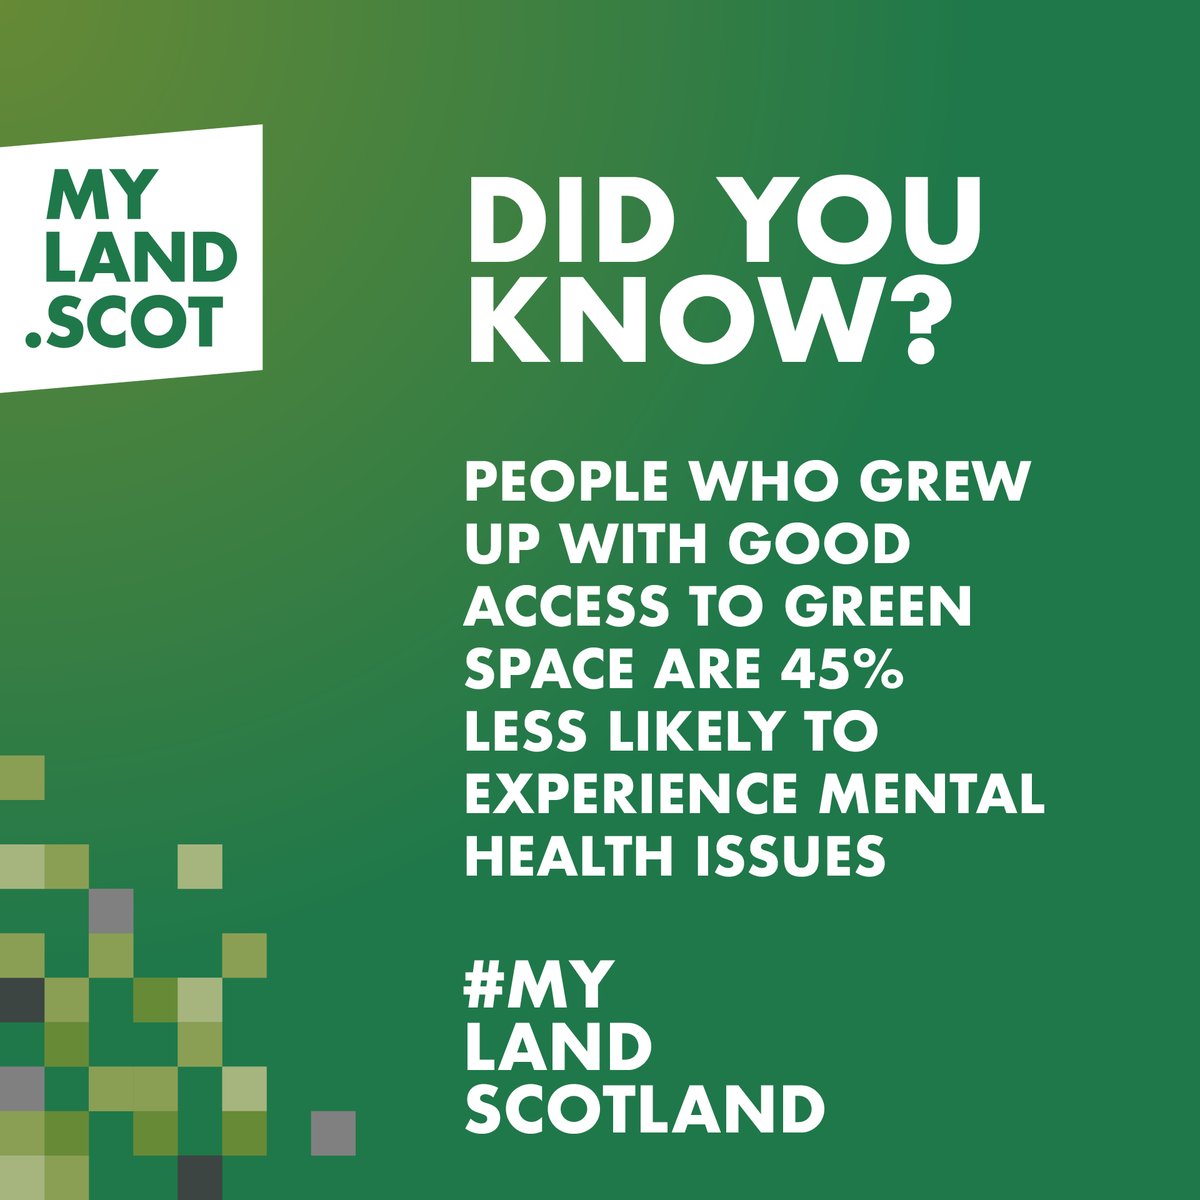 Did you know people who grew up with good access to green space are 45% less likely to experience mental health issues? Visit MyLand.scot and be inspired by the fantastic stories to see how you could make a difference in your area #MyLandScotland 🏴󠁧󠁢󠁳󠁣󠁴󠁿 ✨